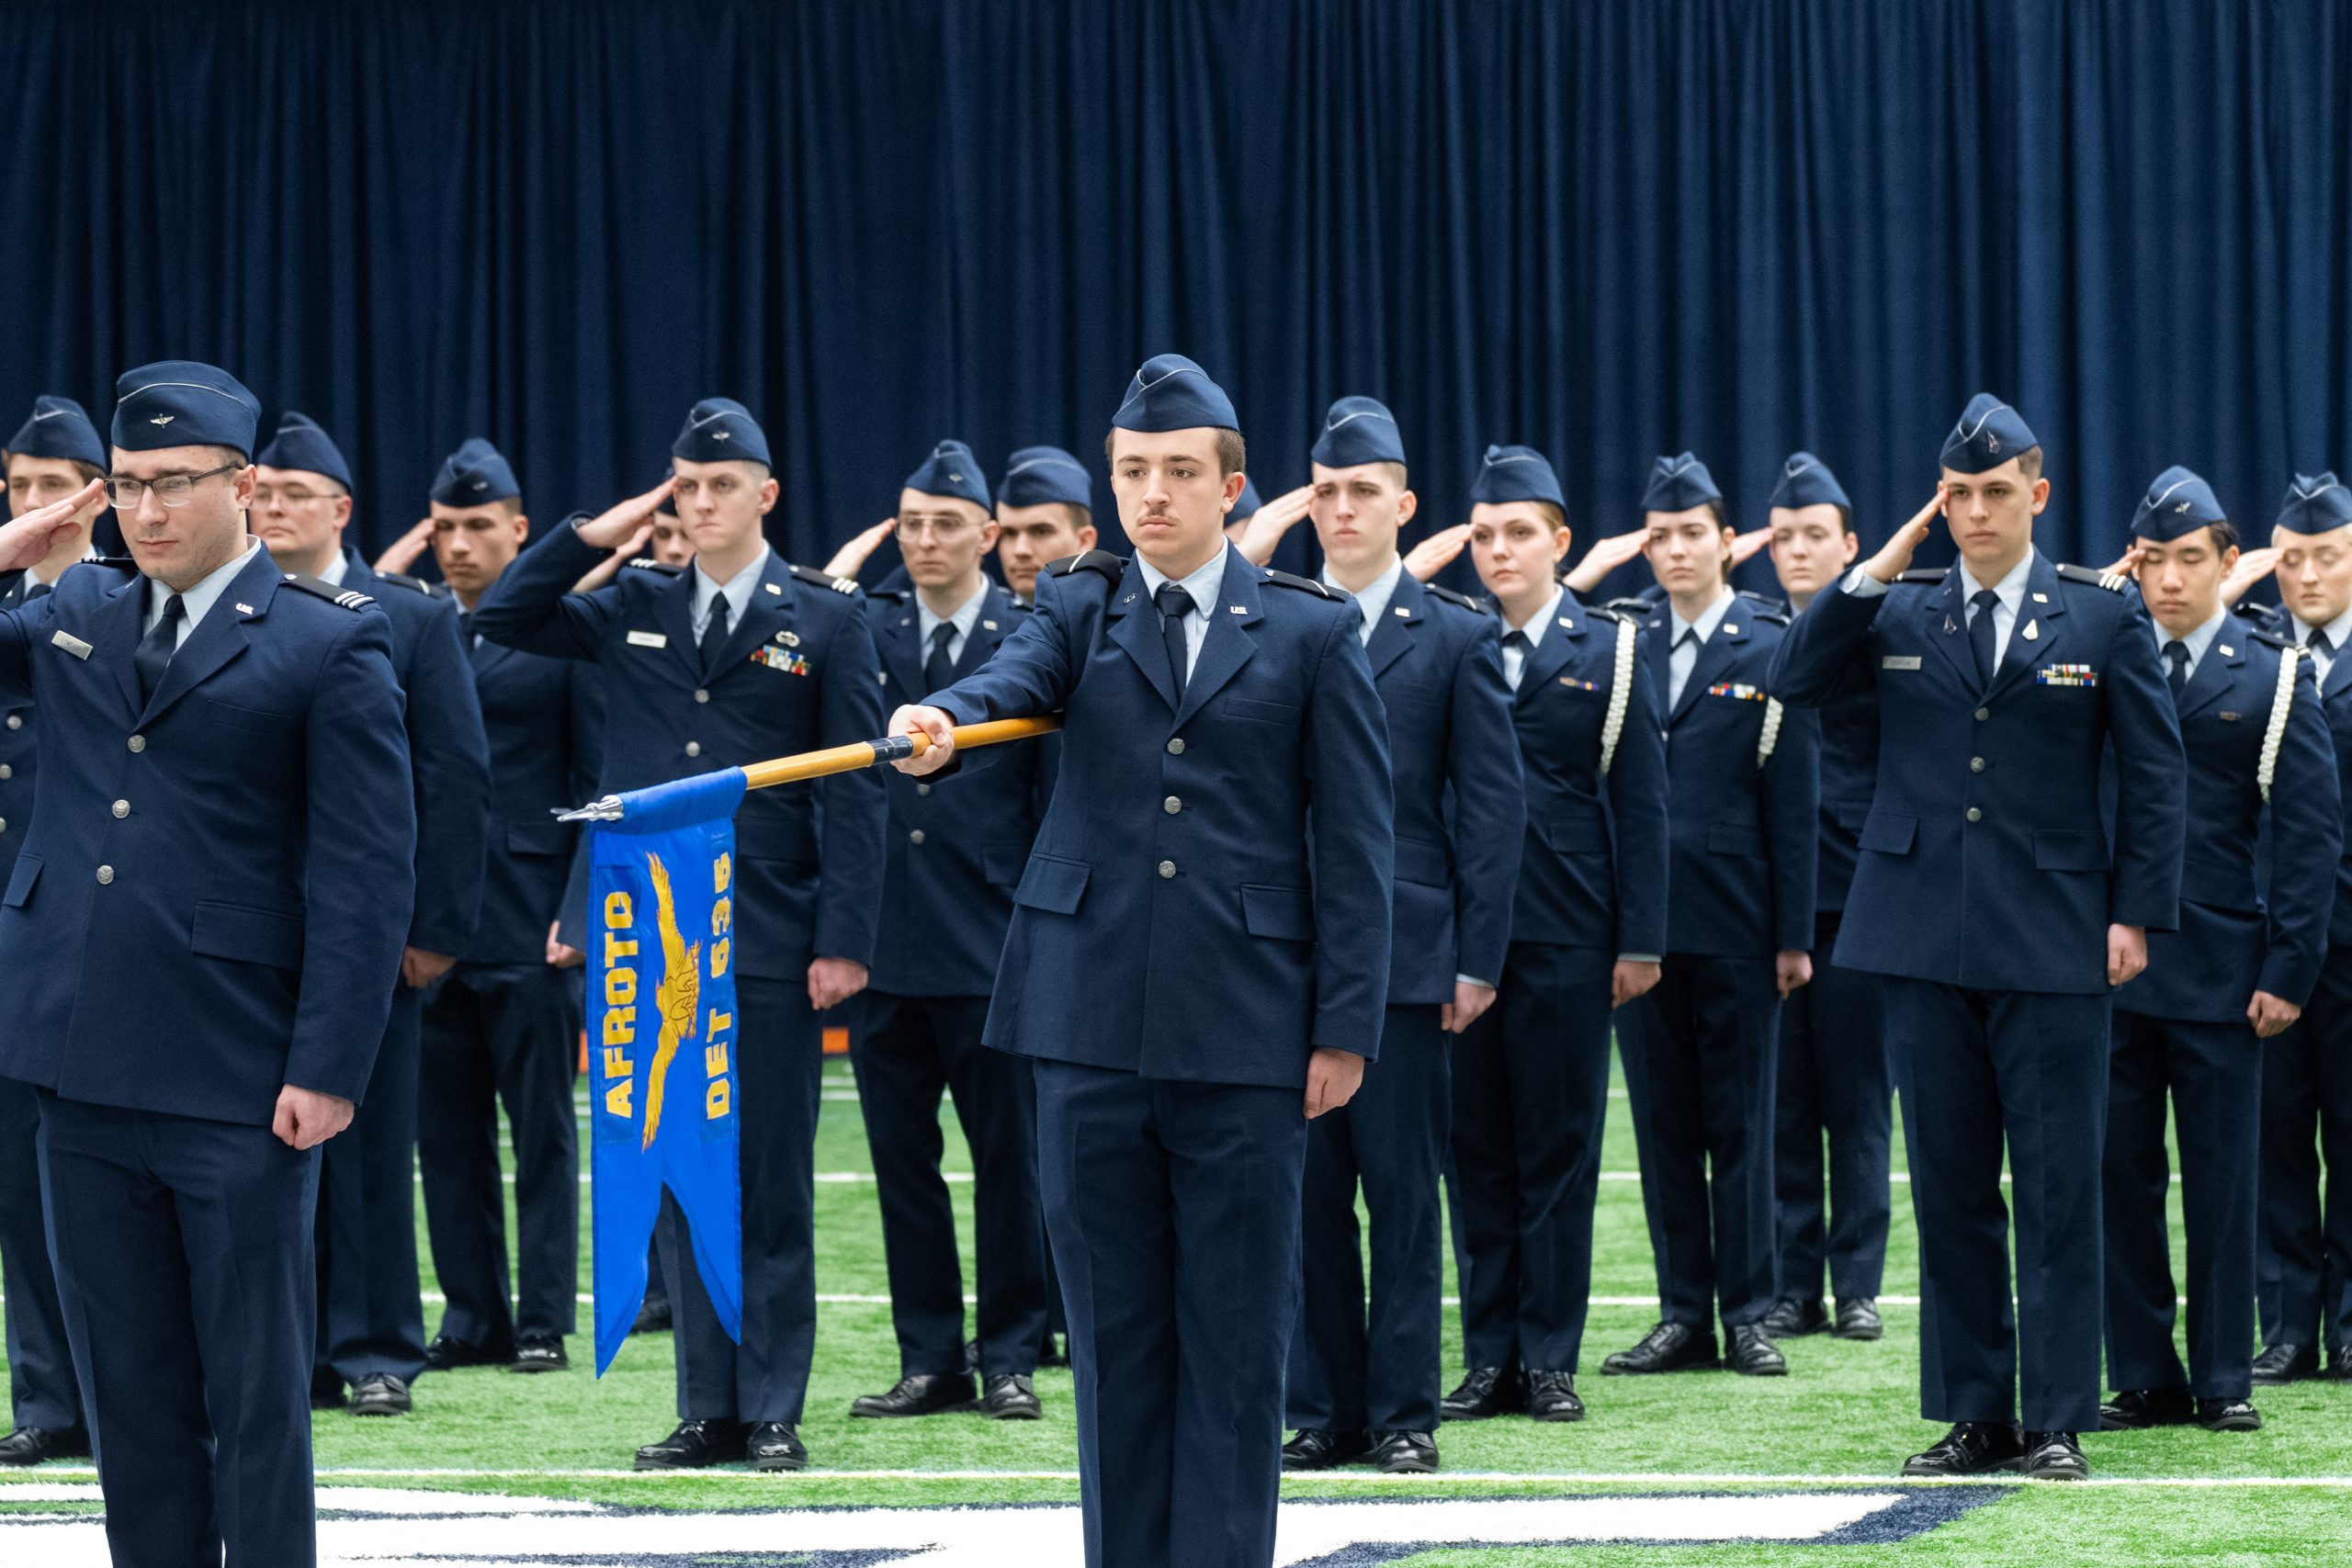 afrotc cadets in formation during chancellor's review